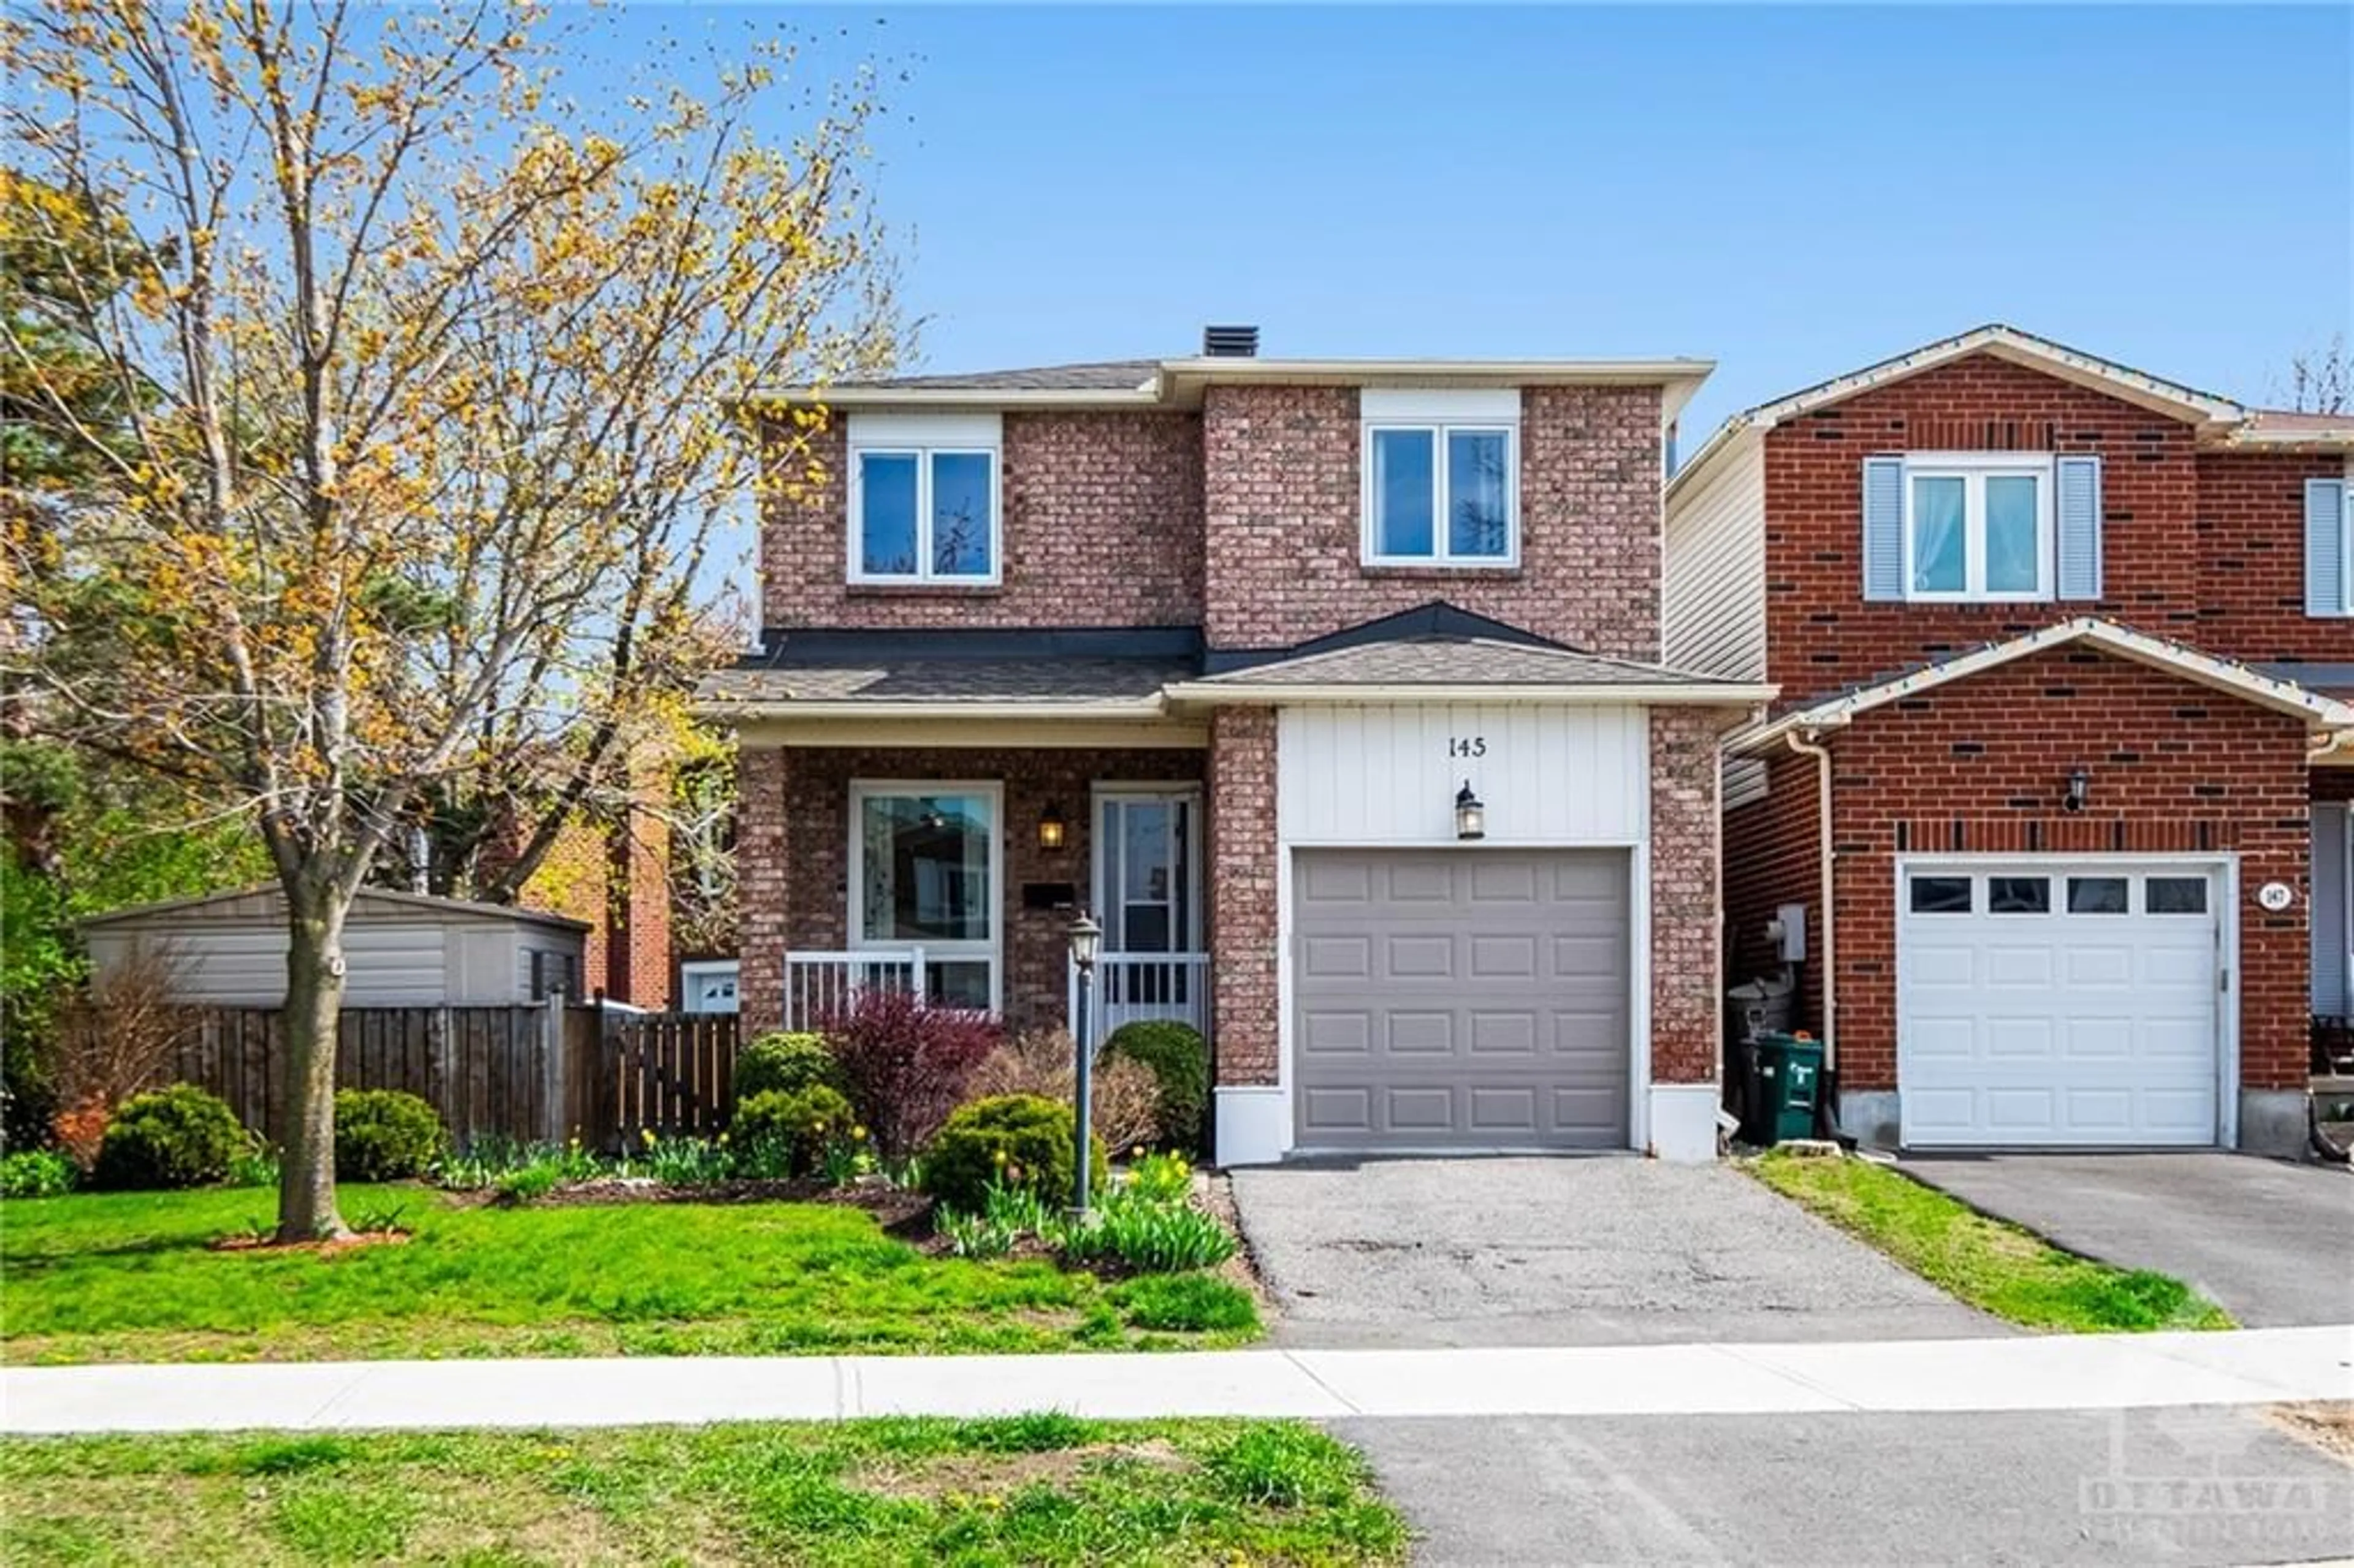 Home with brick exterior material for 145 MCCURDY Dr, Kanata Ontario K2L 2Z7